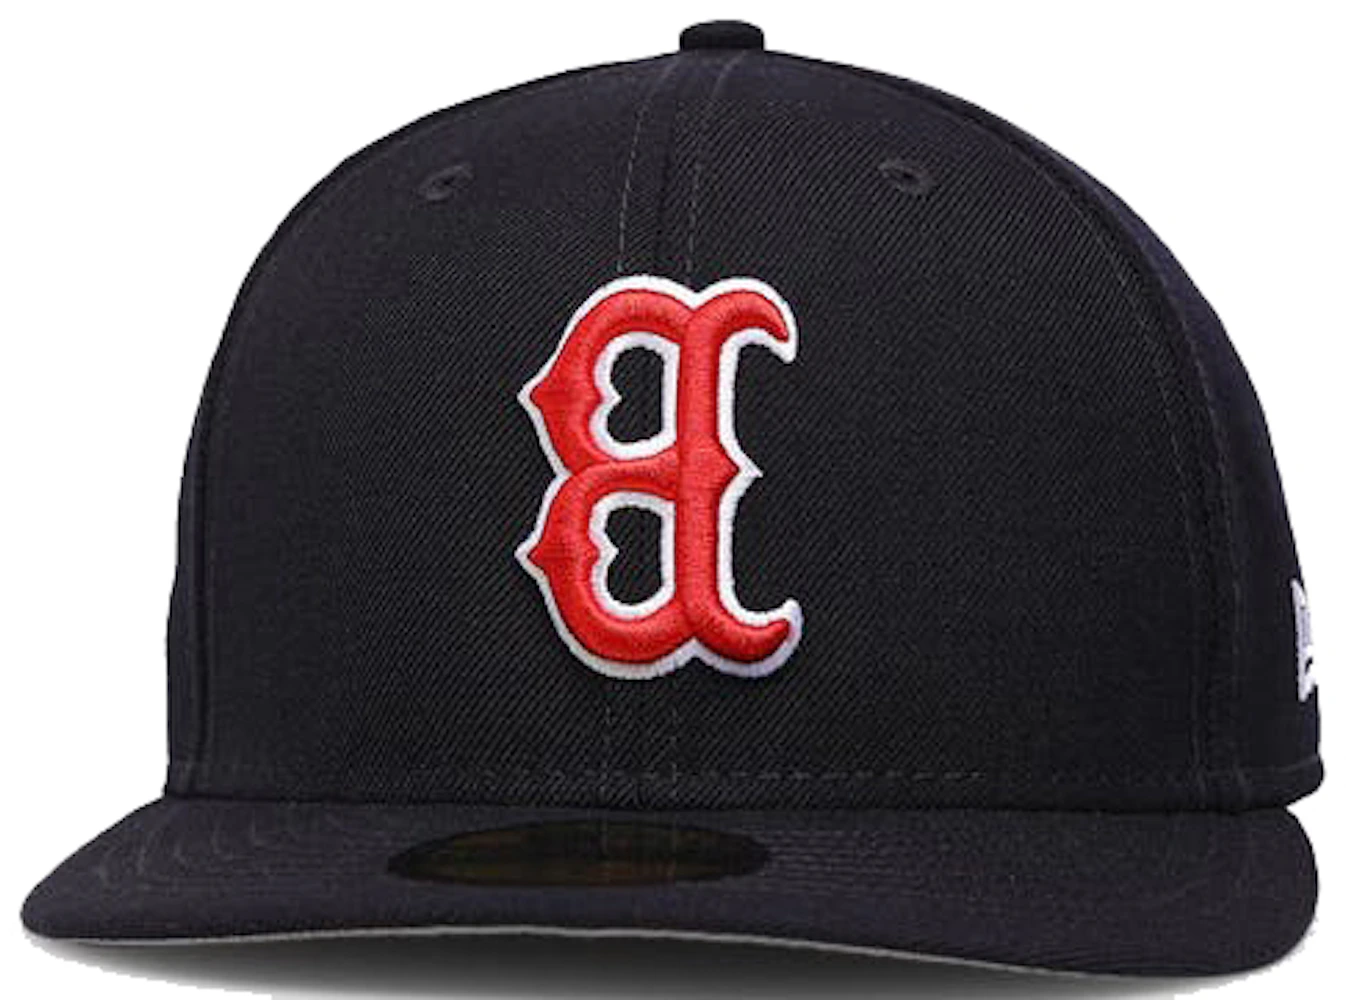 New Era Boston Red Sox Varsity Pin 59FIFTY Fitted Cap Men Caps blue|beige in Size:7 1/2